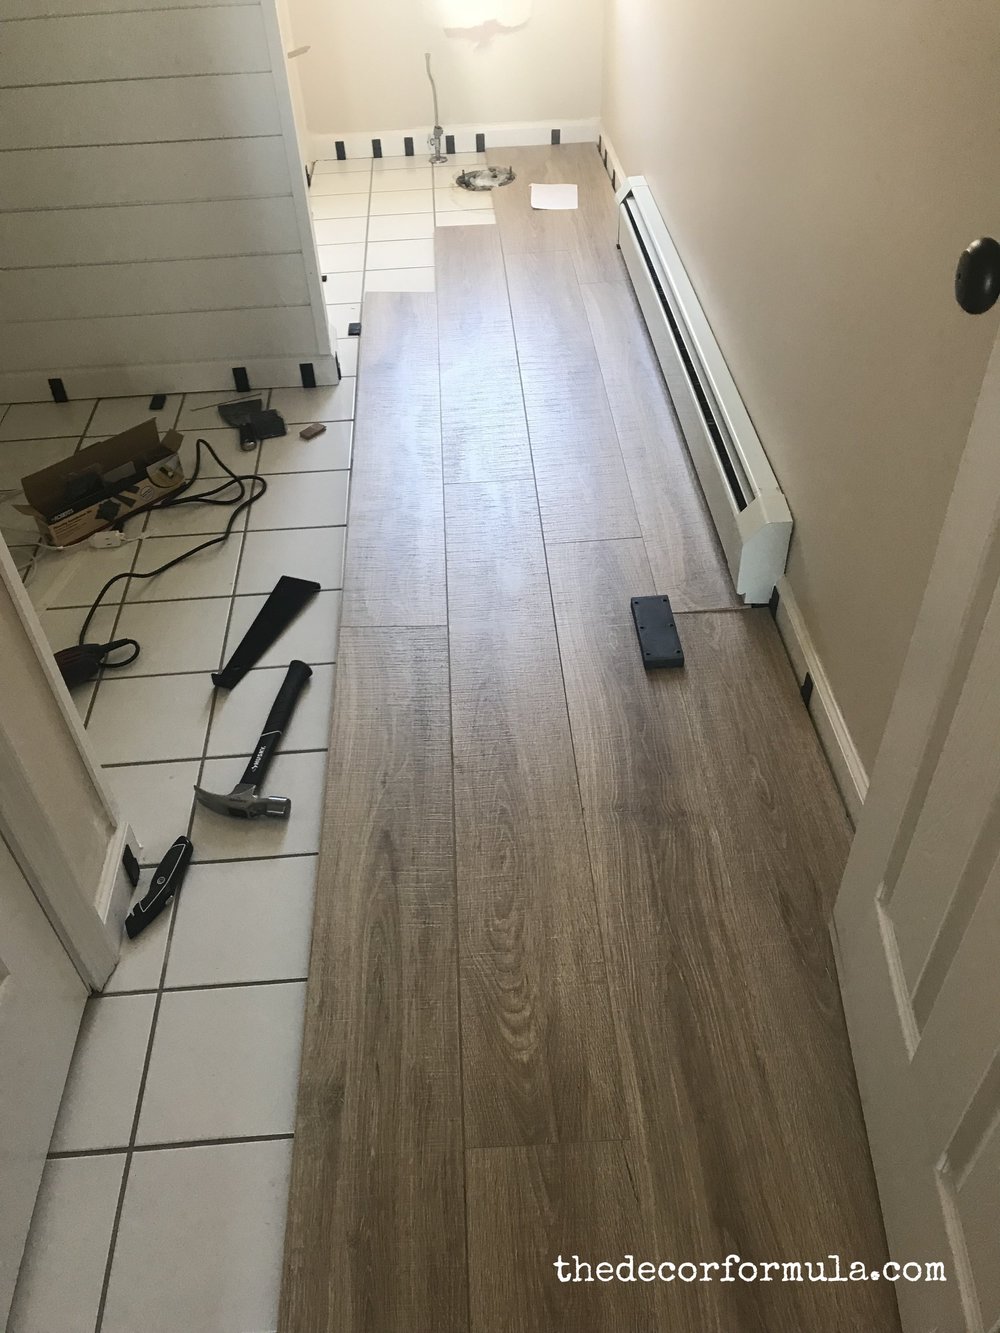 Ideas For Covering Up Tile Floors, How To Lay Laminate Flooring Over Tile